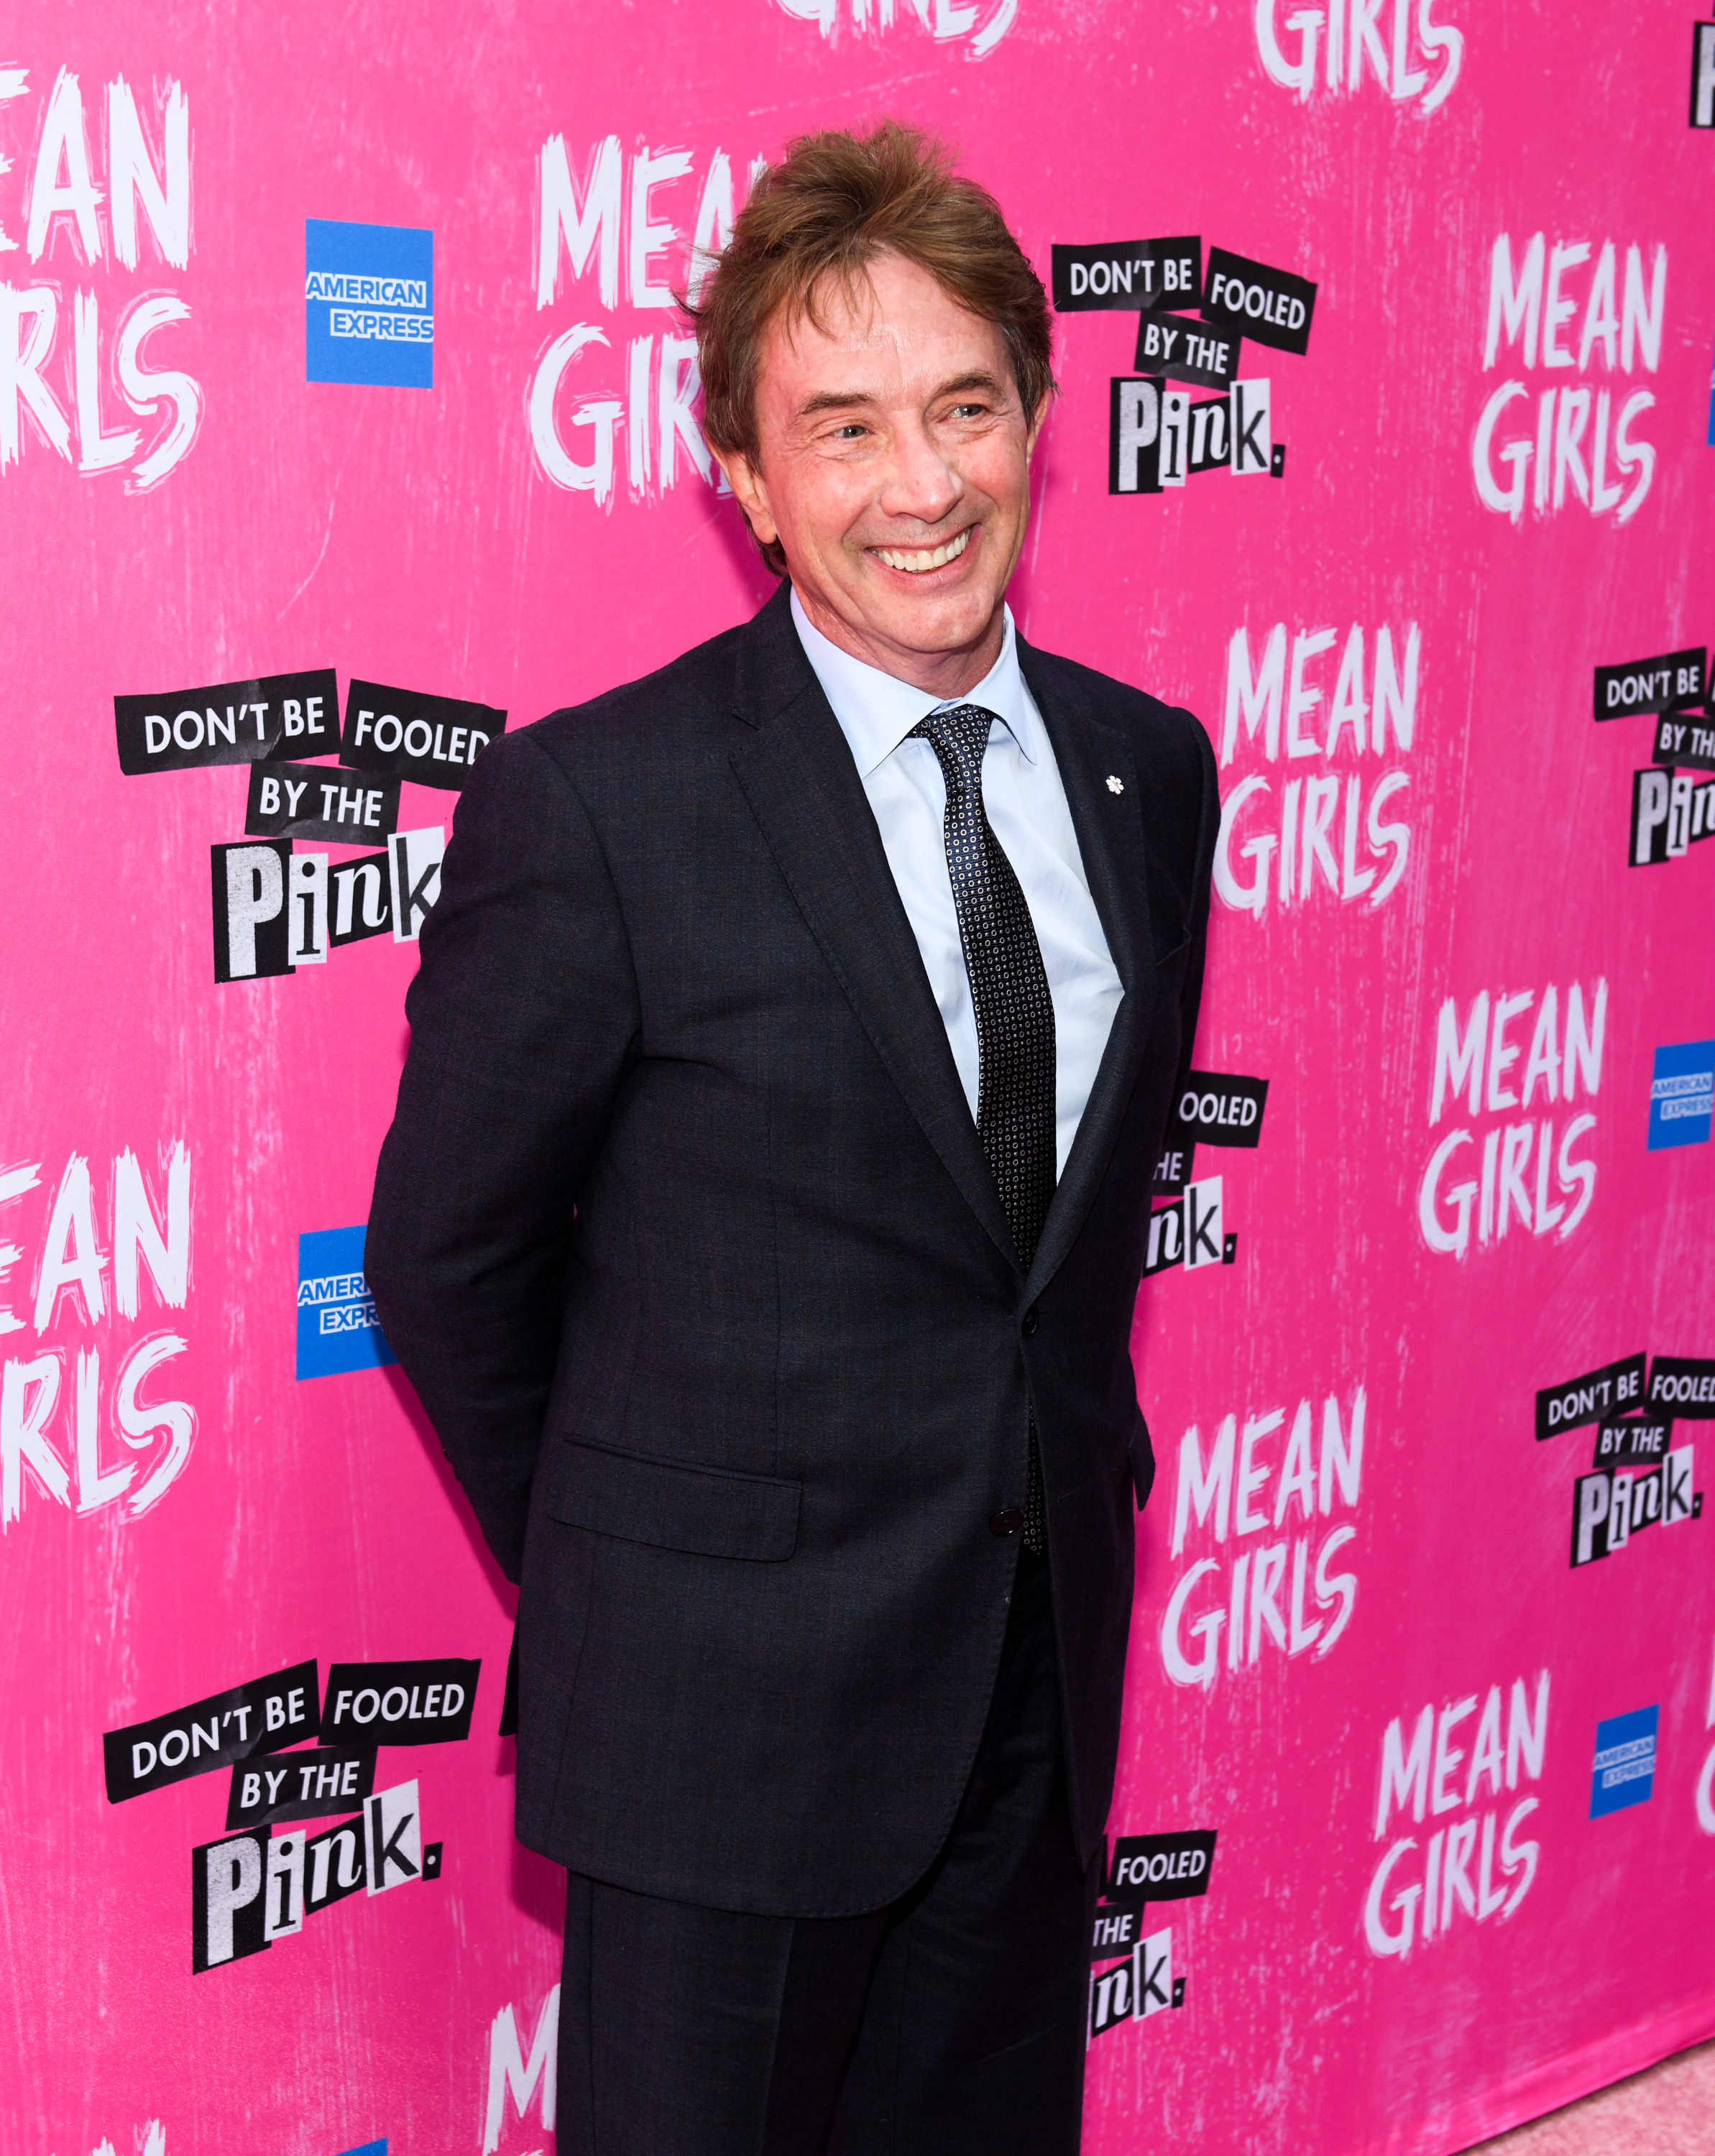 Martin Short attends the opening night of "Mean Girls" on Broadway at August Wilson Theatre in New York City, on April 8, 2018. | Source: Getty Images